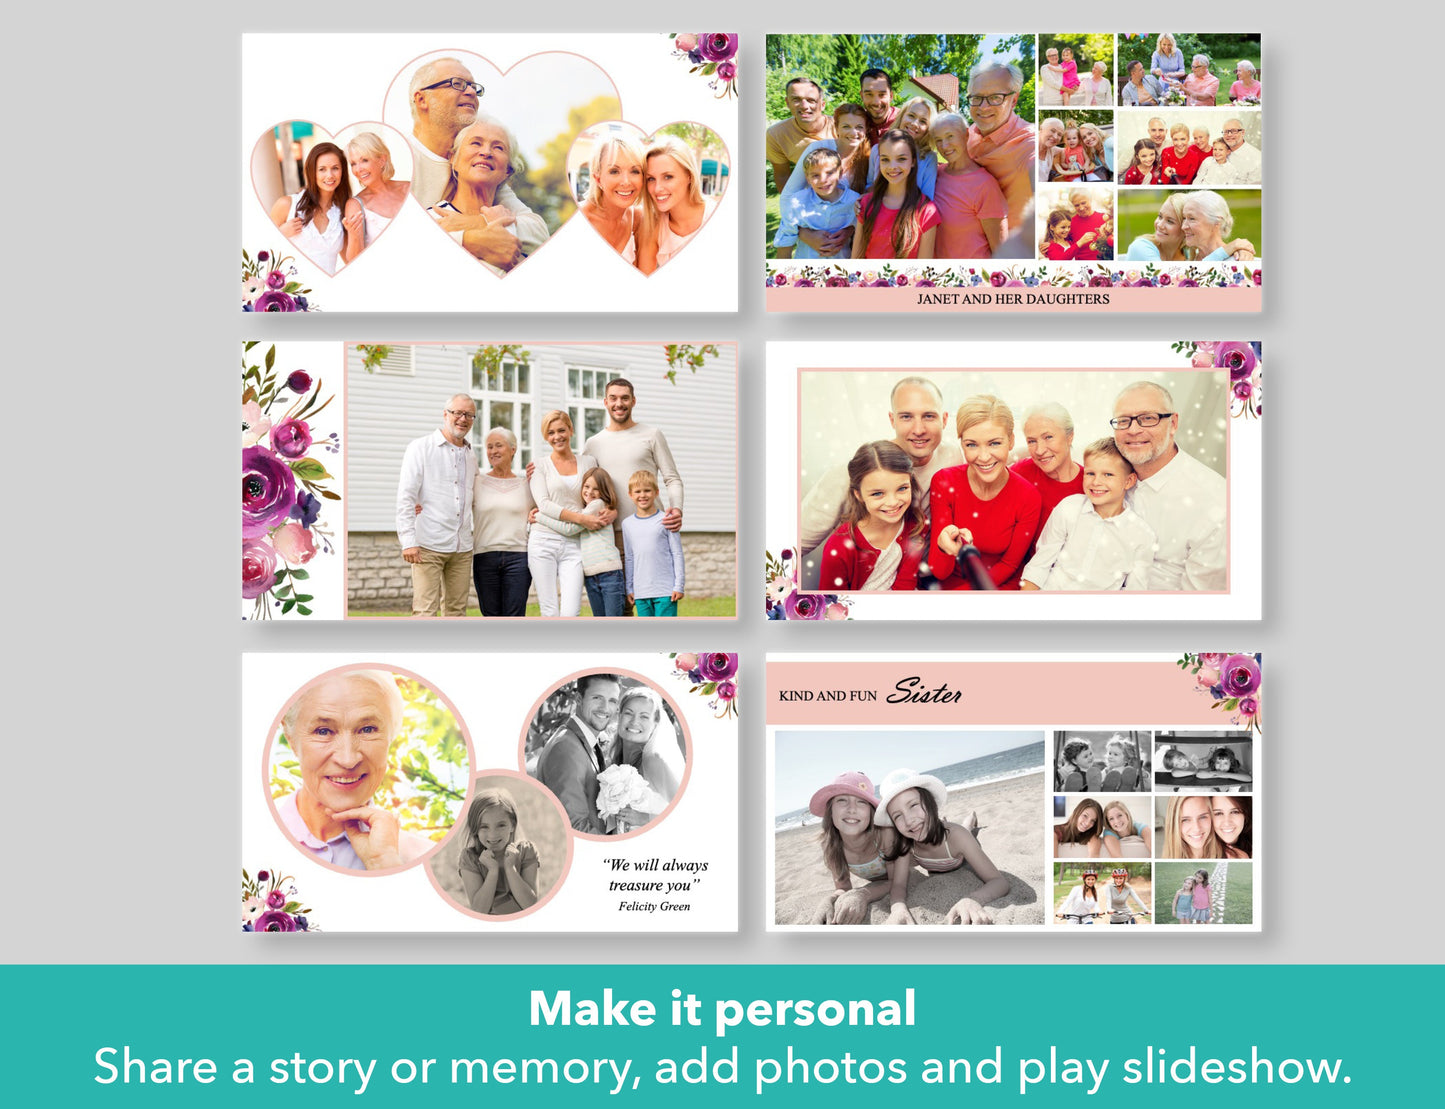 Premium Funeral Slideshow Template with Purple Roses